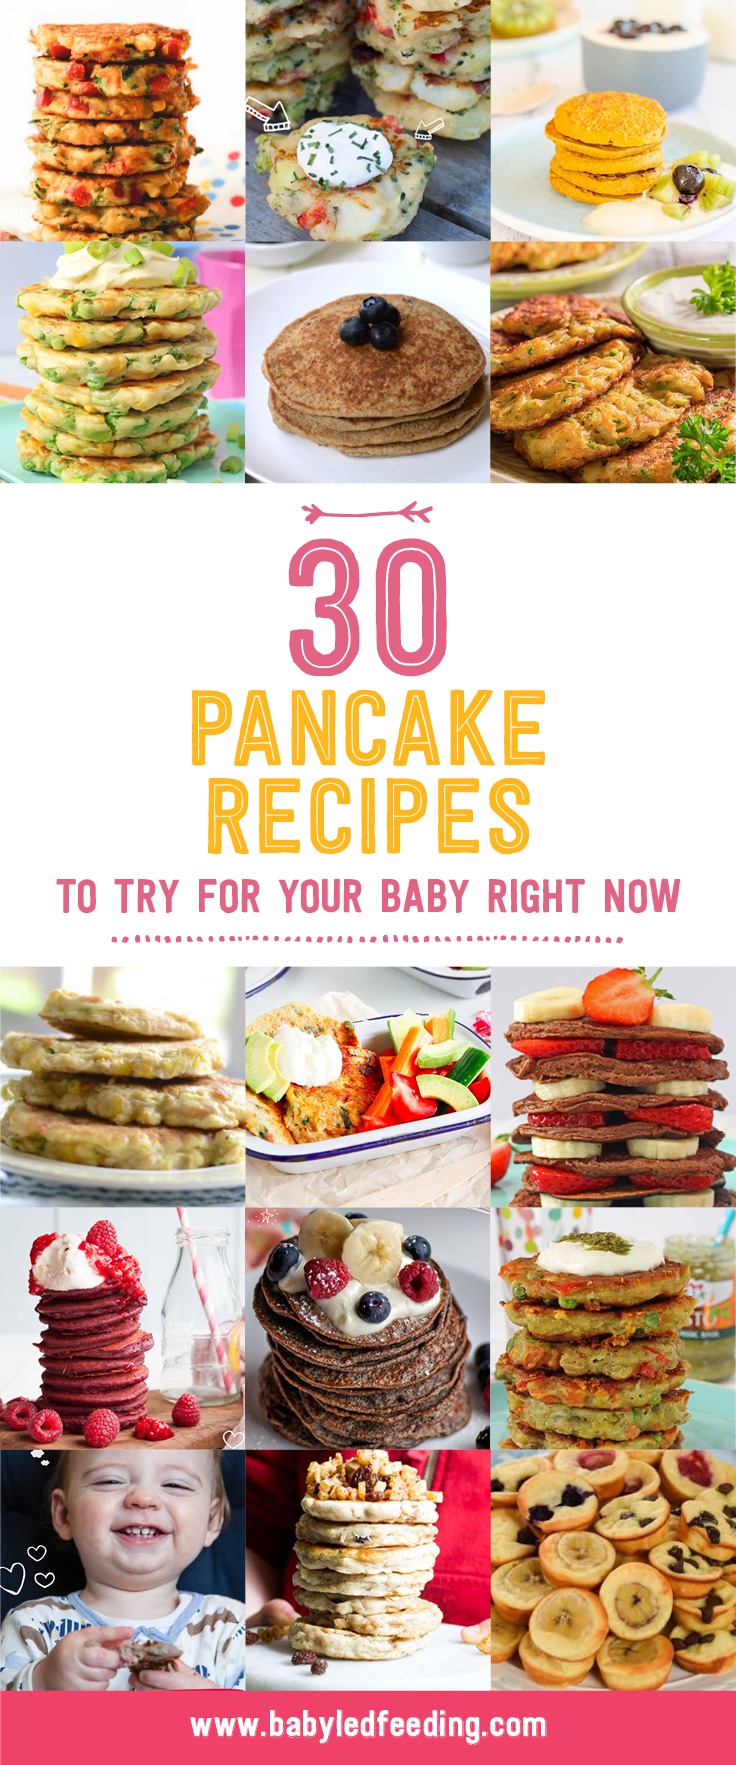 Ultimate List of Pancake Recipes! Baby pancakes, veggie pancakes, fruit pancakes, oat pancakes, wheat free pancakes, quinoa pancakes... Healthy sweet pancake and savory pancake recipe. Make ahead and freeze! The ultimate baby led weaning finger food! #pancakes #pancakerecipe #babyledweaning #pickyeater #fingerfood